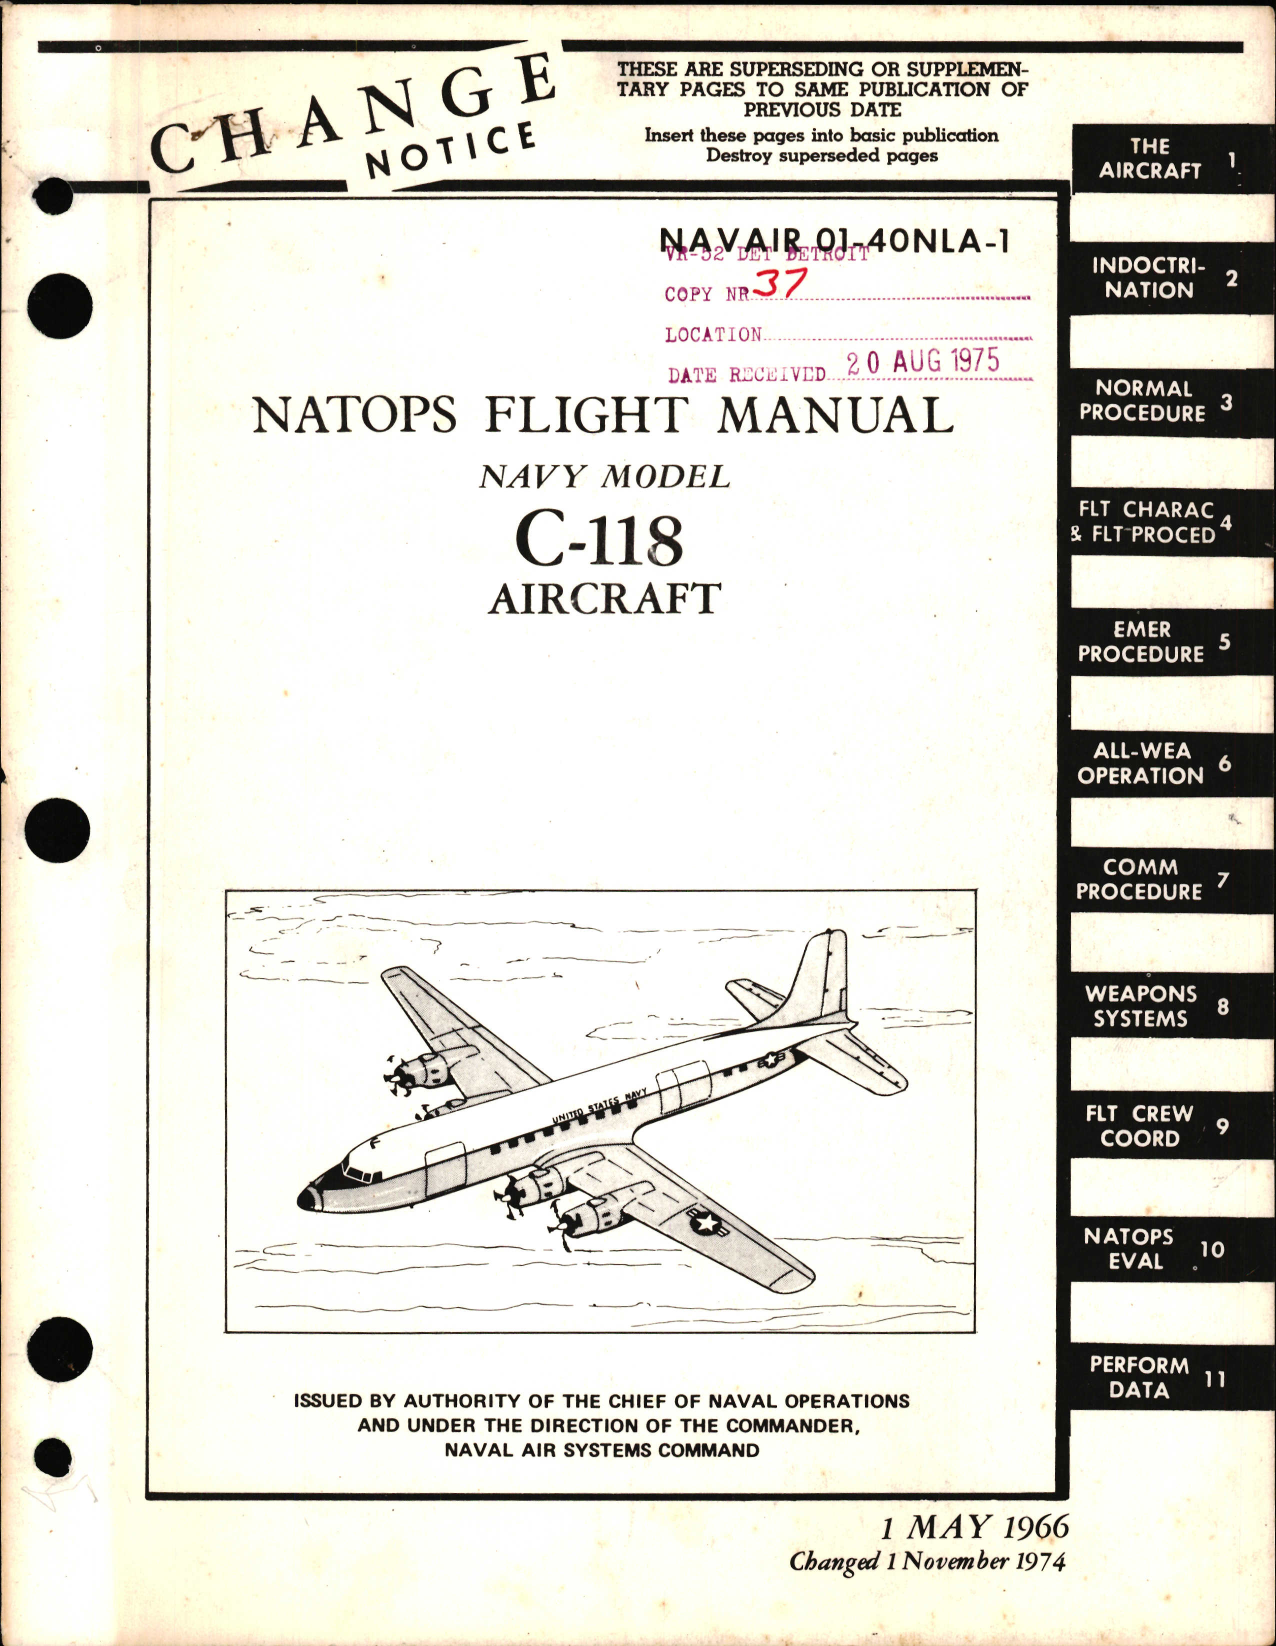 Sample page 1 from AirCorps Library document: NATOPS Flight Manual for Navy Model C-118 